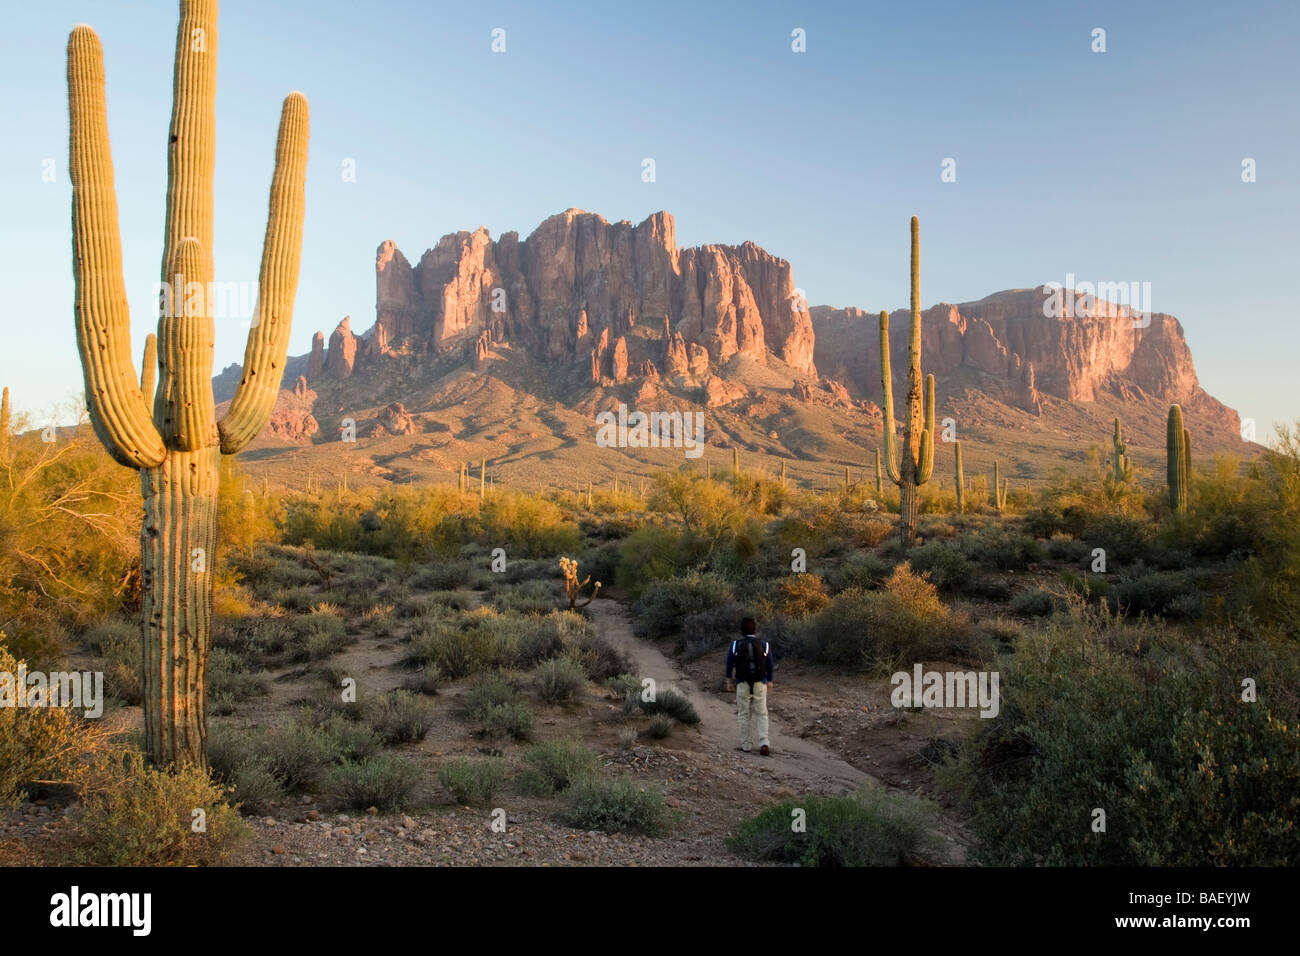 Hiker on trail to Superstition Mountains - Lost Dutchman State Park - Apache Junction, Arizona Stock Photo